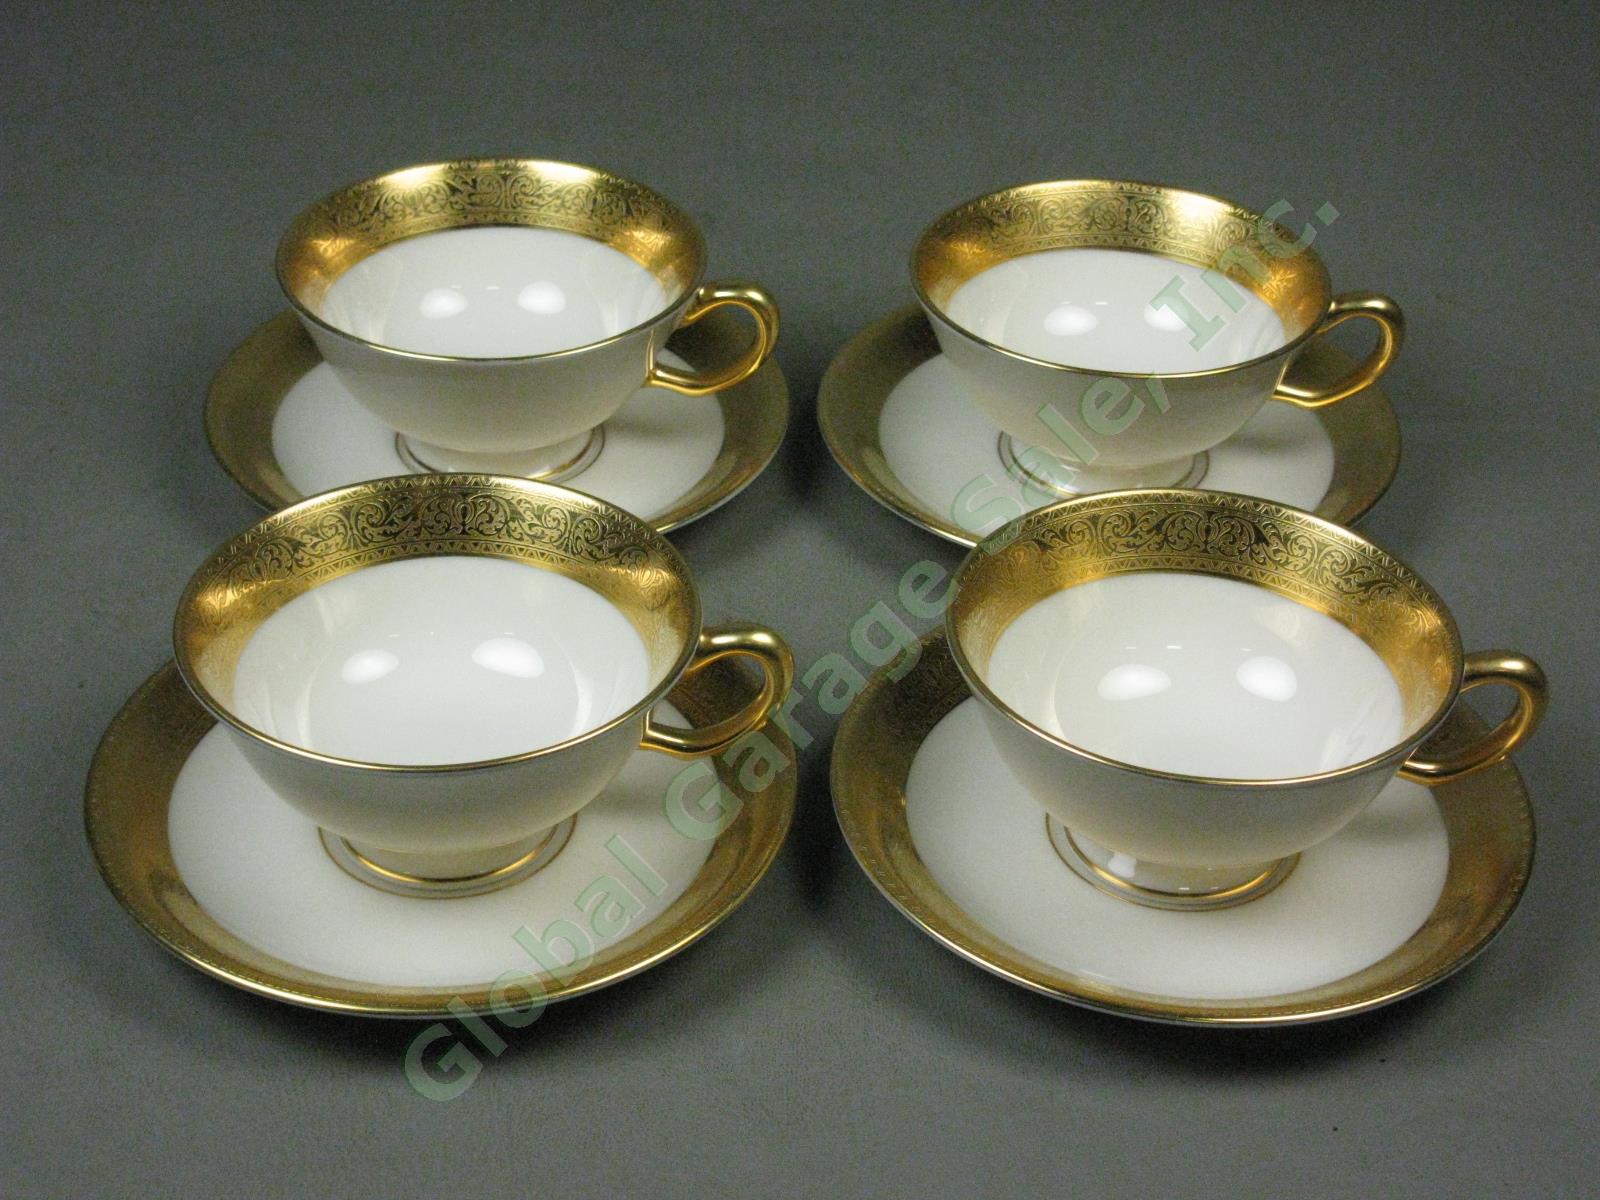 4 Lenox Westchester China M139 Presidential Gold Encrusted Tea Cup Saucer Set NR